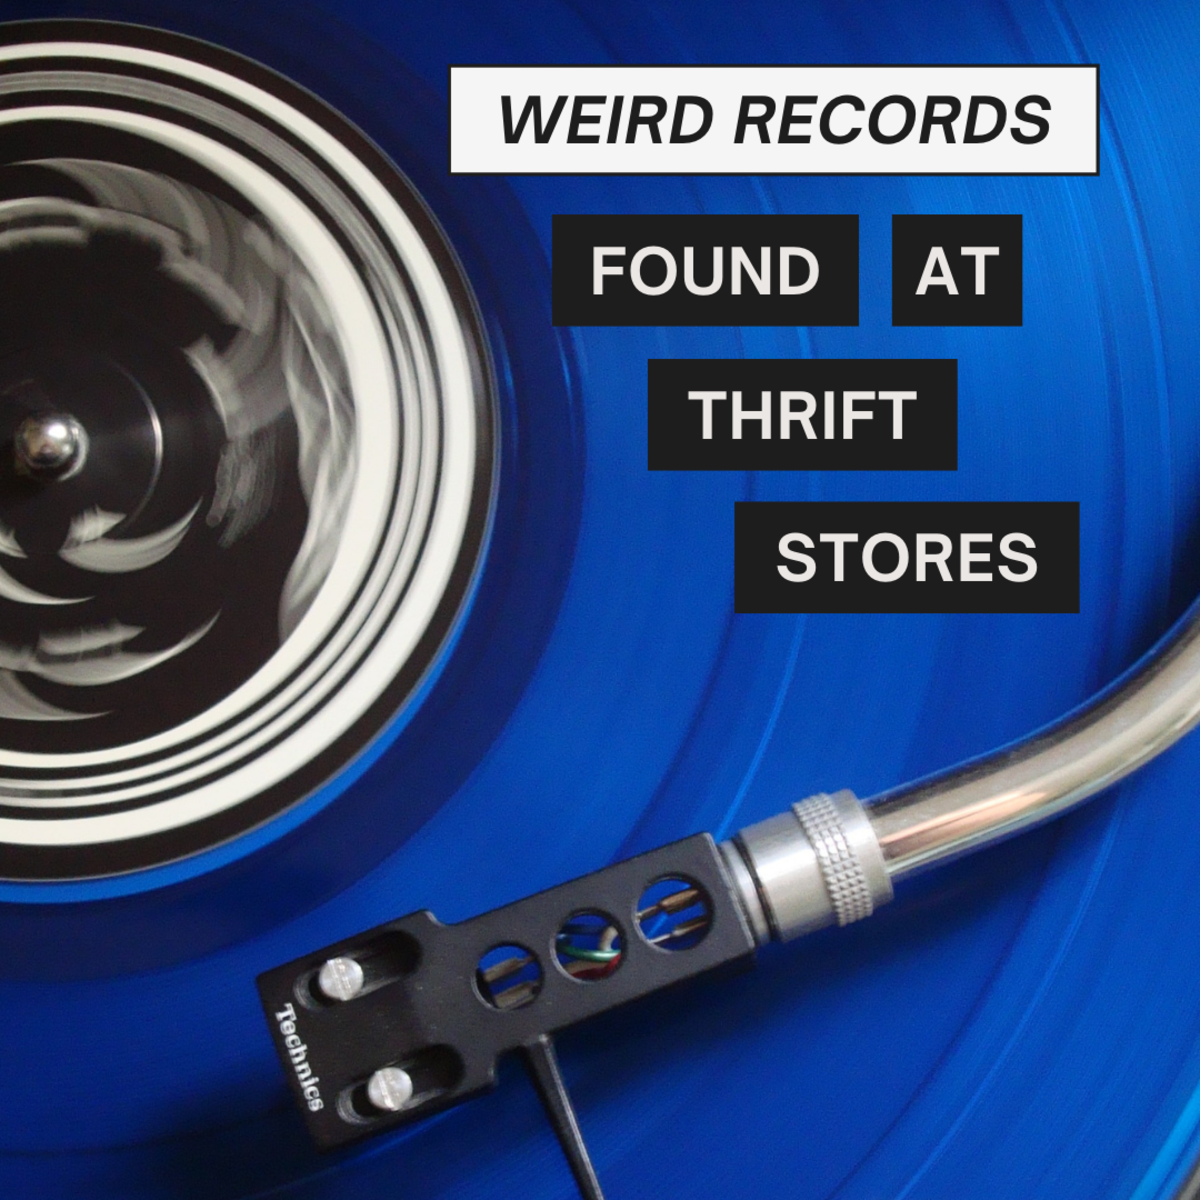 This article will take a look at some weird records I've found at thrift stores.